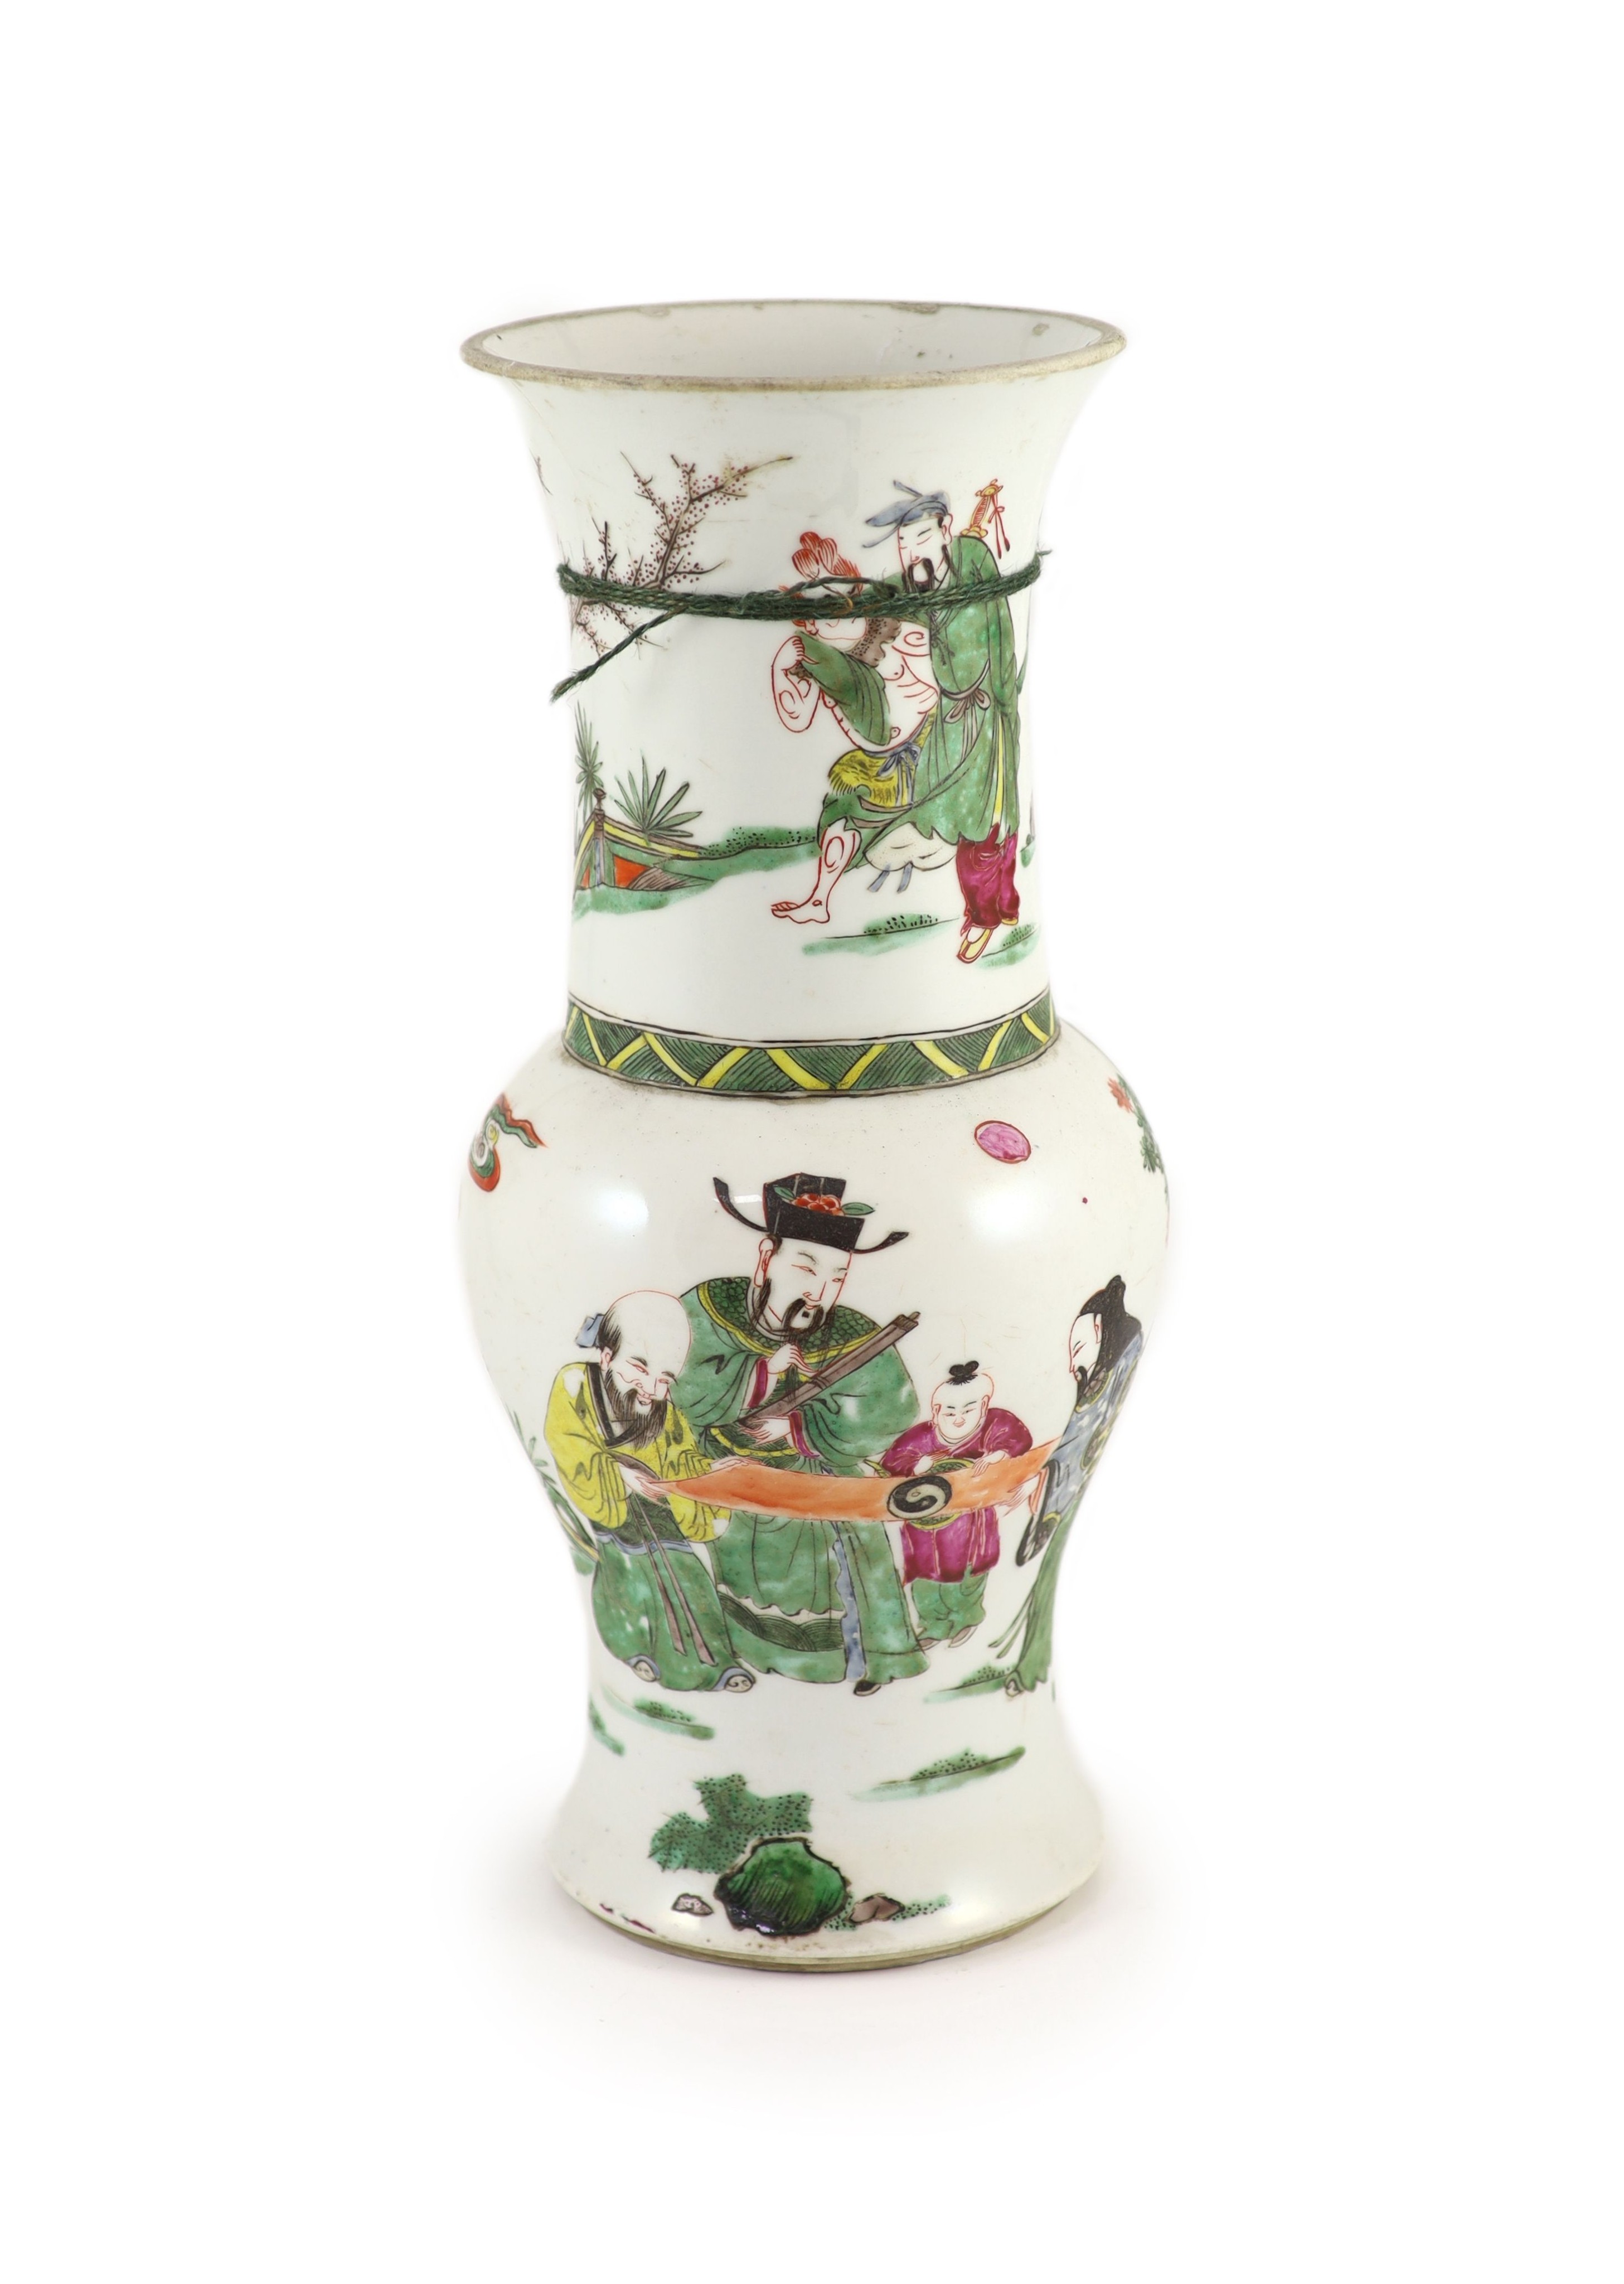 A Chinese famille rose yen-yen vase, Yongzheng period (1723-35), 40.5 cm high, damage and reduced neck                                                                                                                      